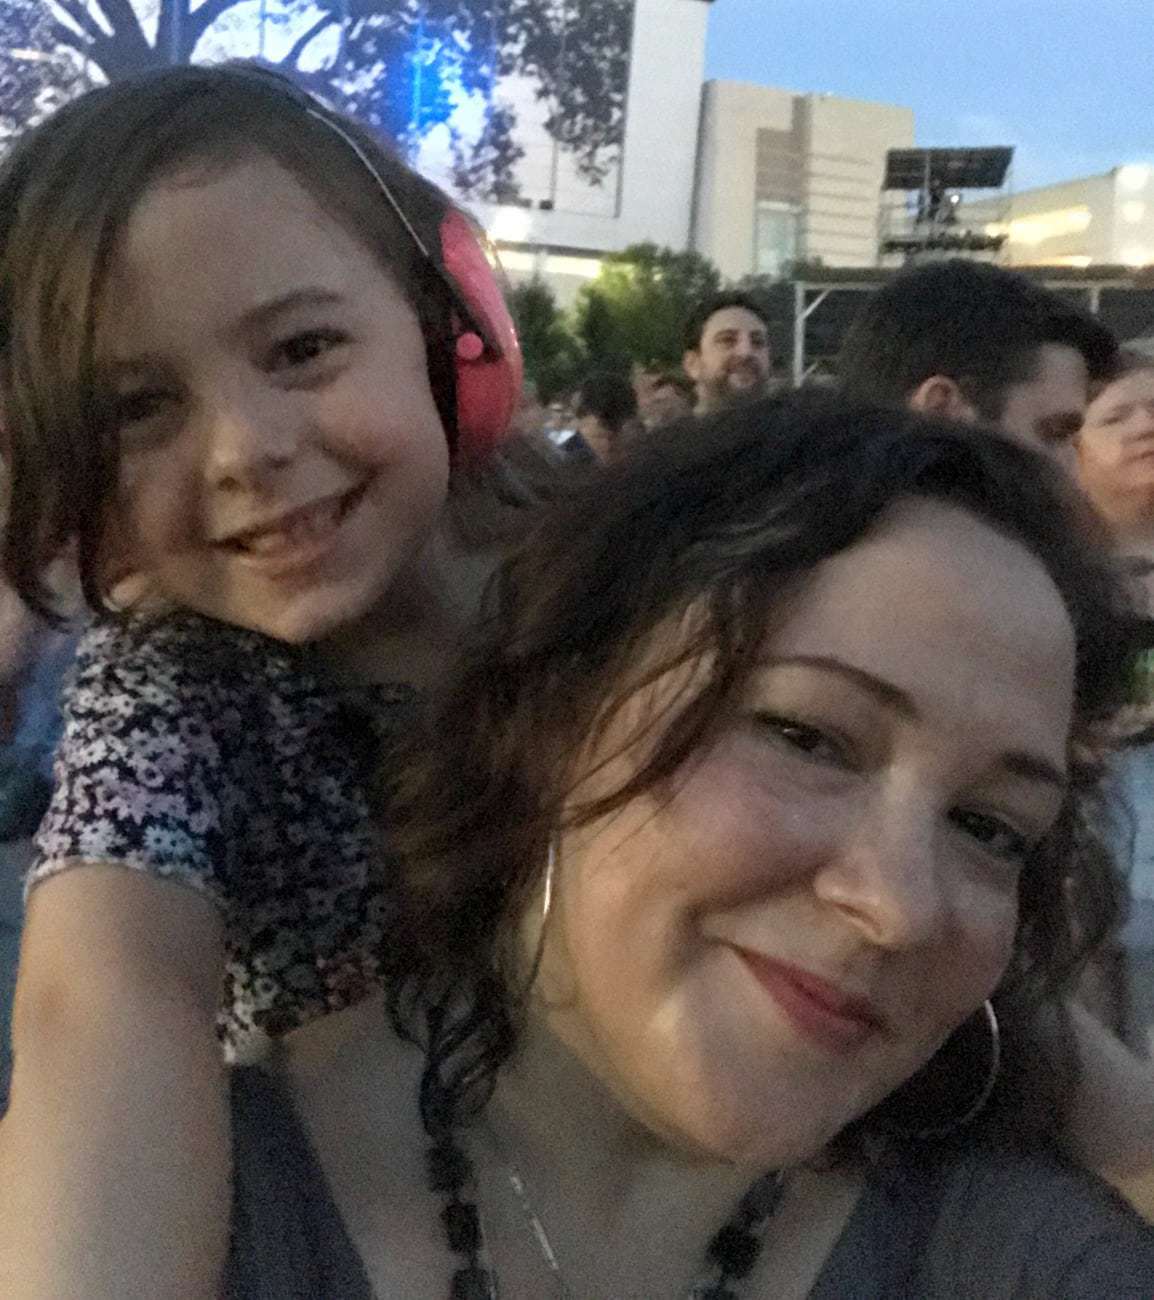 taking a kid to her first concert